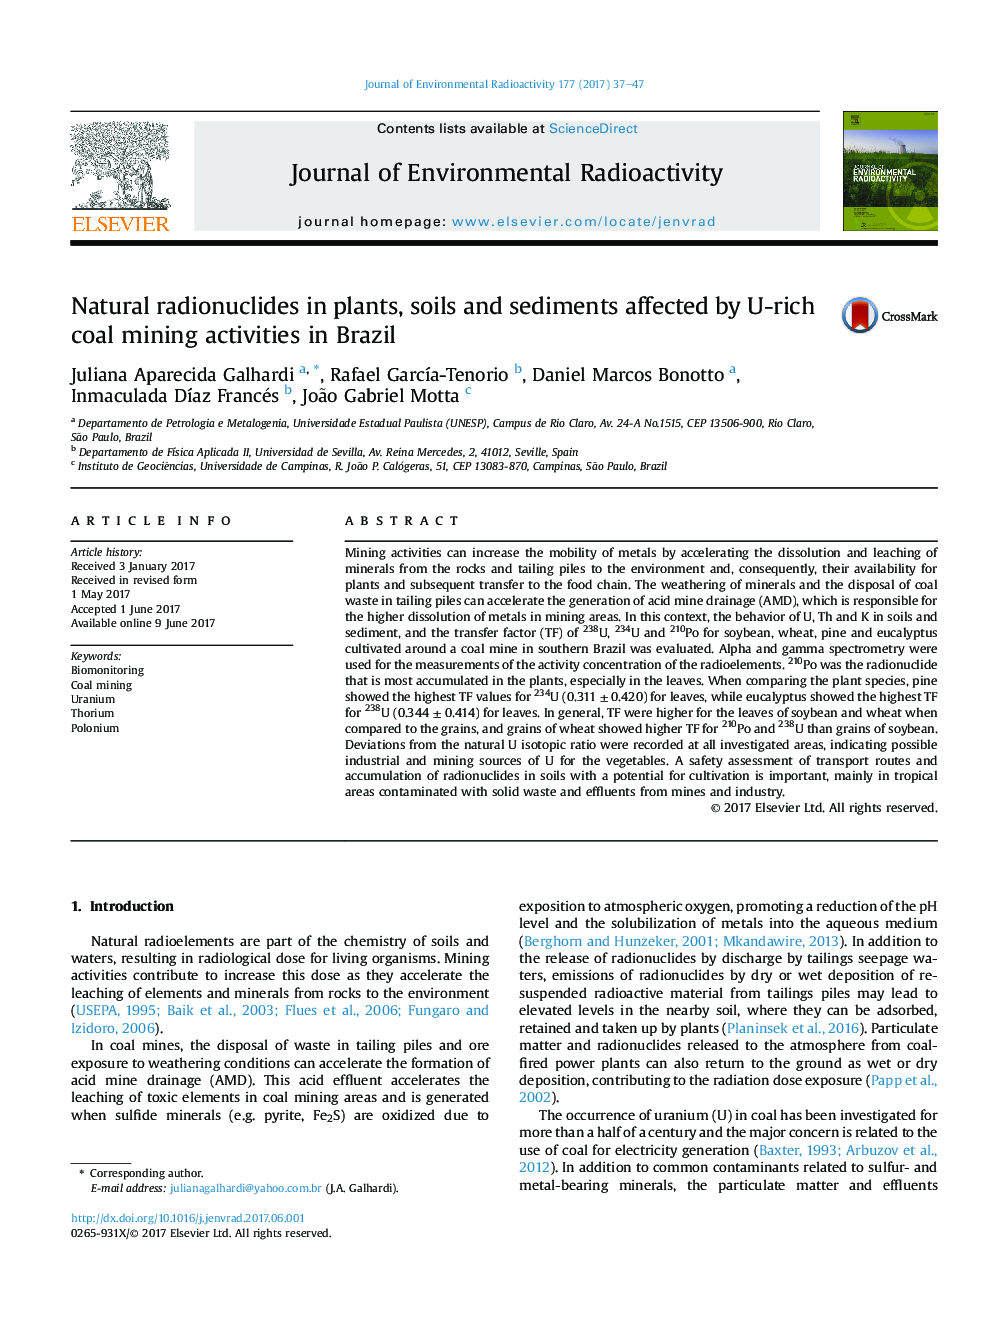 Natural radionuclides in plants, soils and sediments affected by U-rich coal mining activities in Brazil